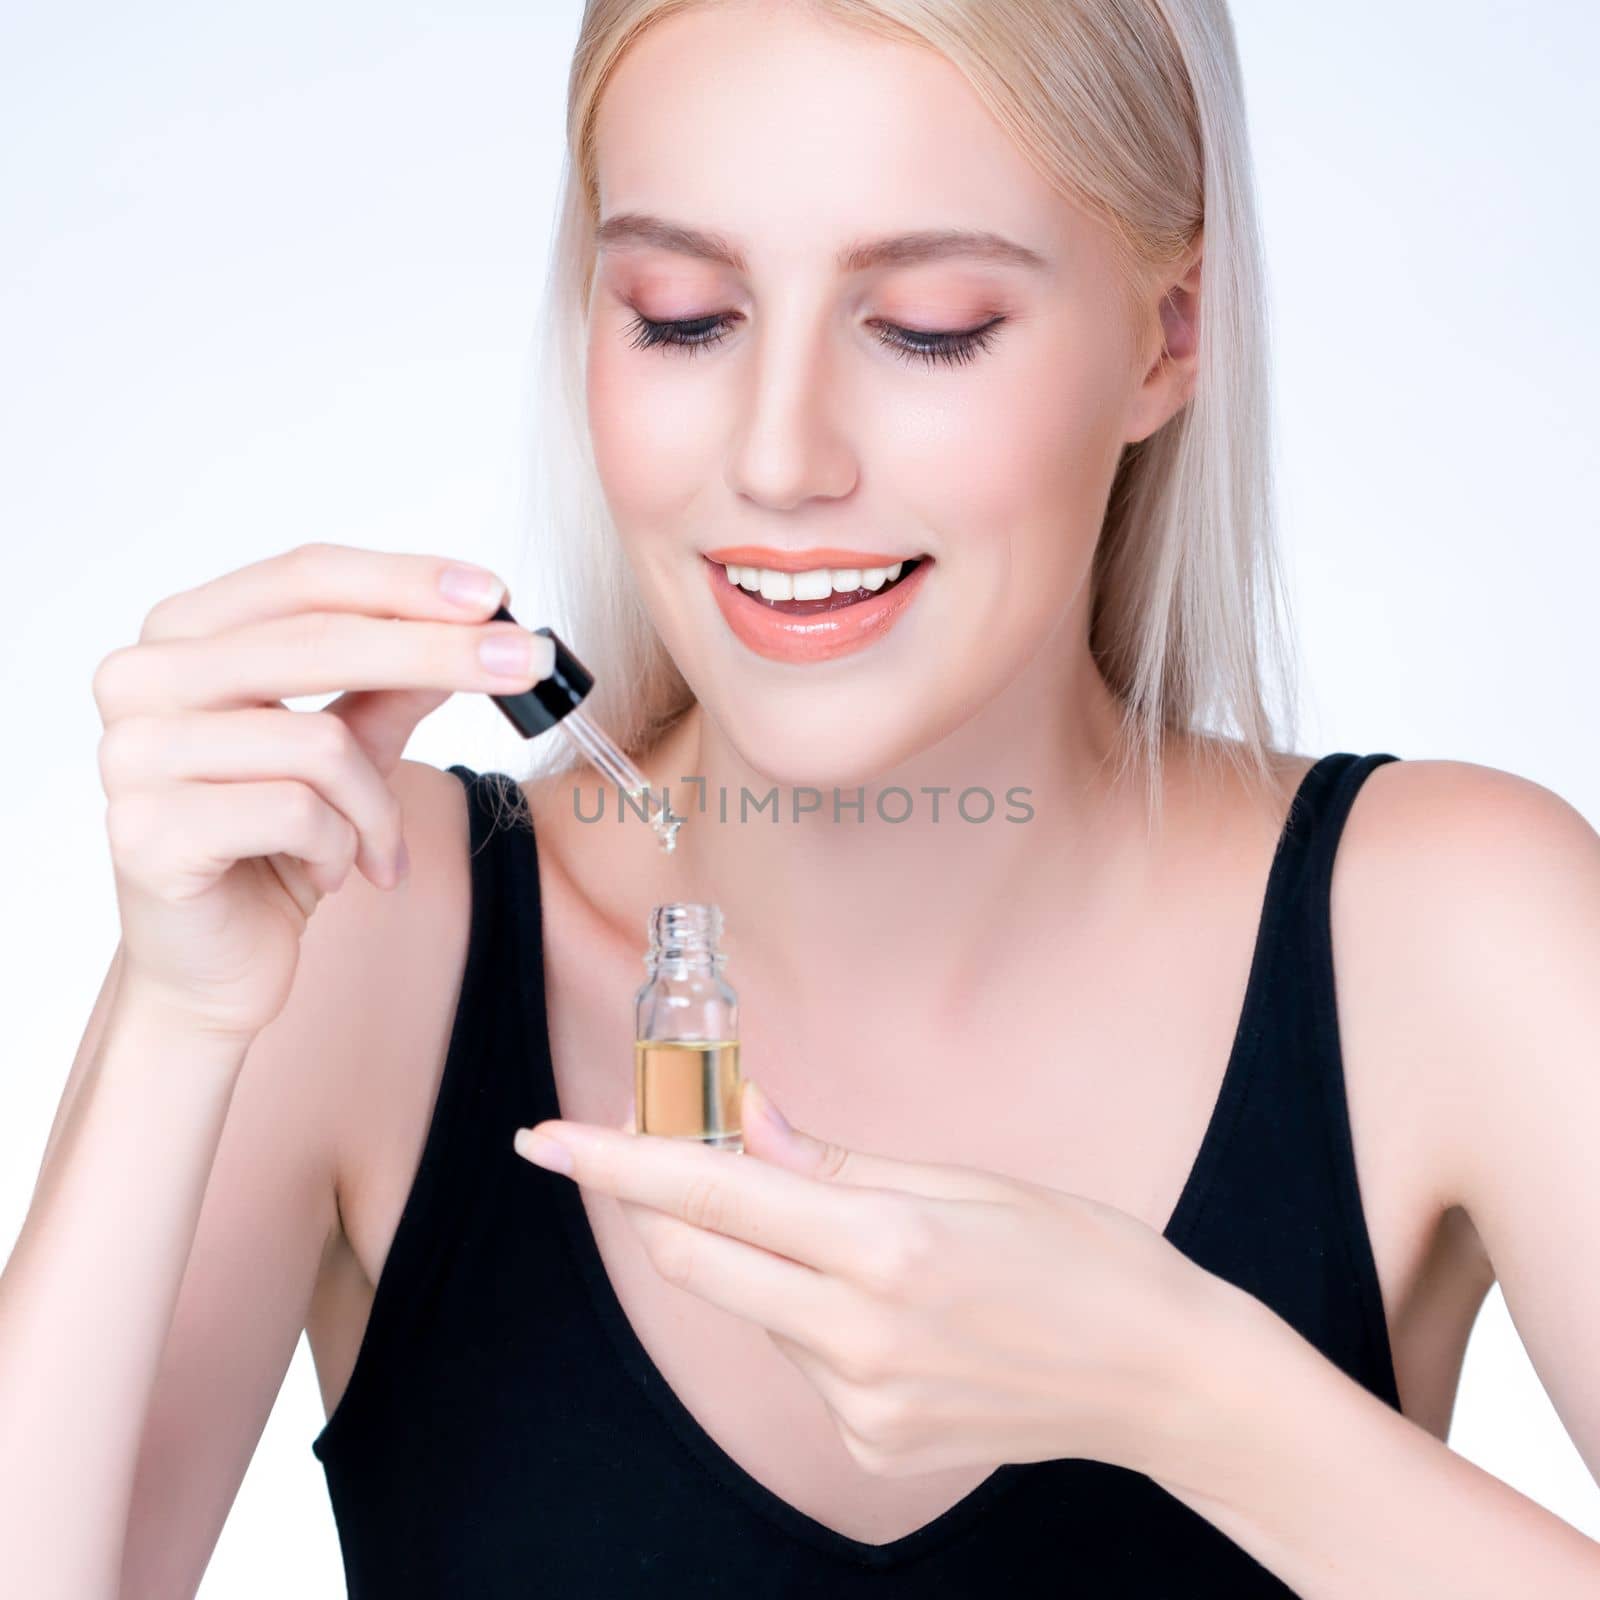 Personable closeup woman with natural makeup applying essential serum oil bottle for skincare product. CBD oil dropper pipette for cosmetology treatment and cannabinoids concept in isolated background